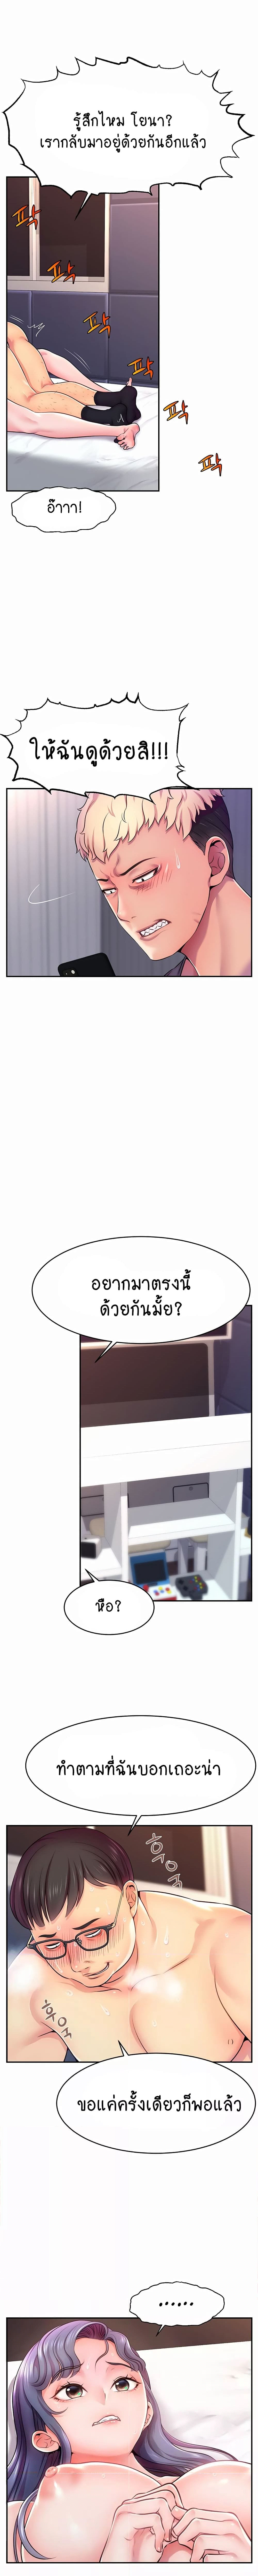 Making Friends With Streamers by Hacking! ตอนที่ 1 ภาพ 10